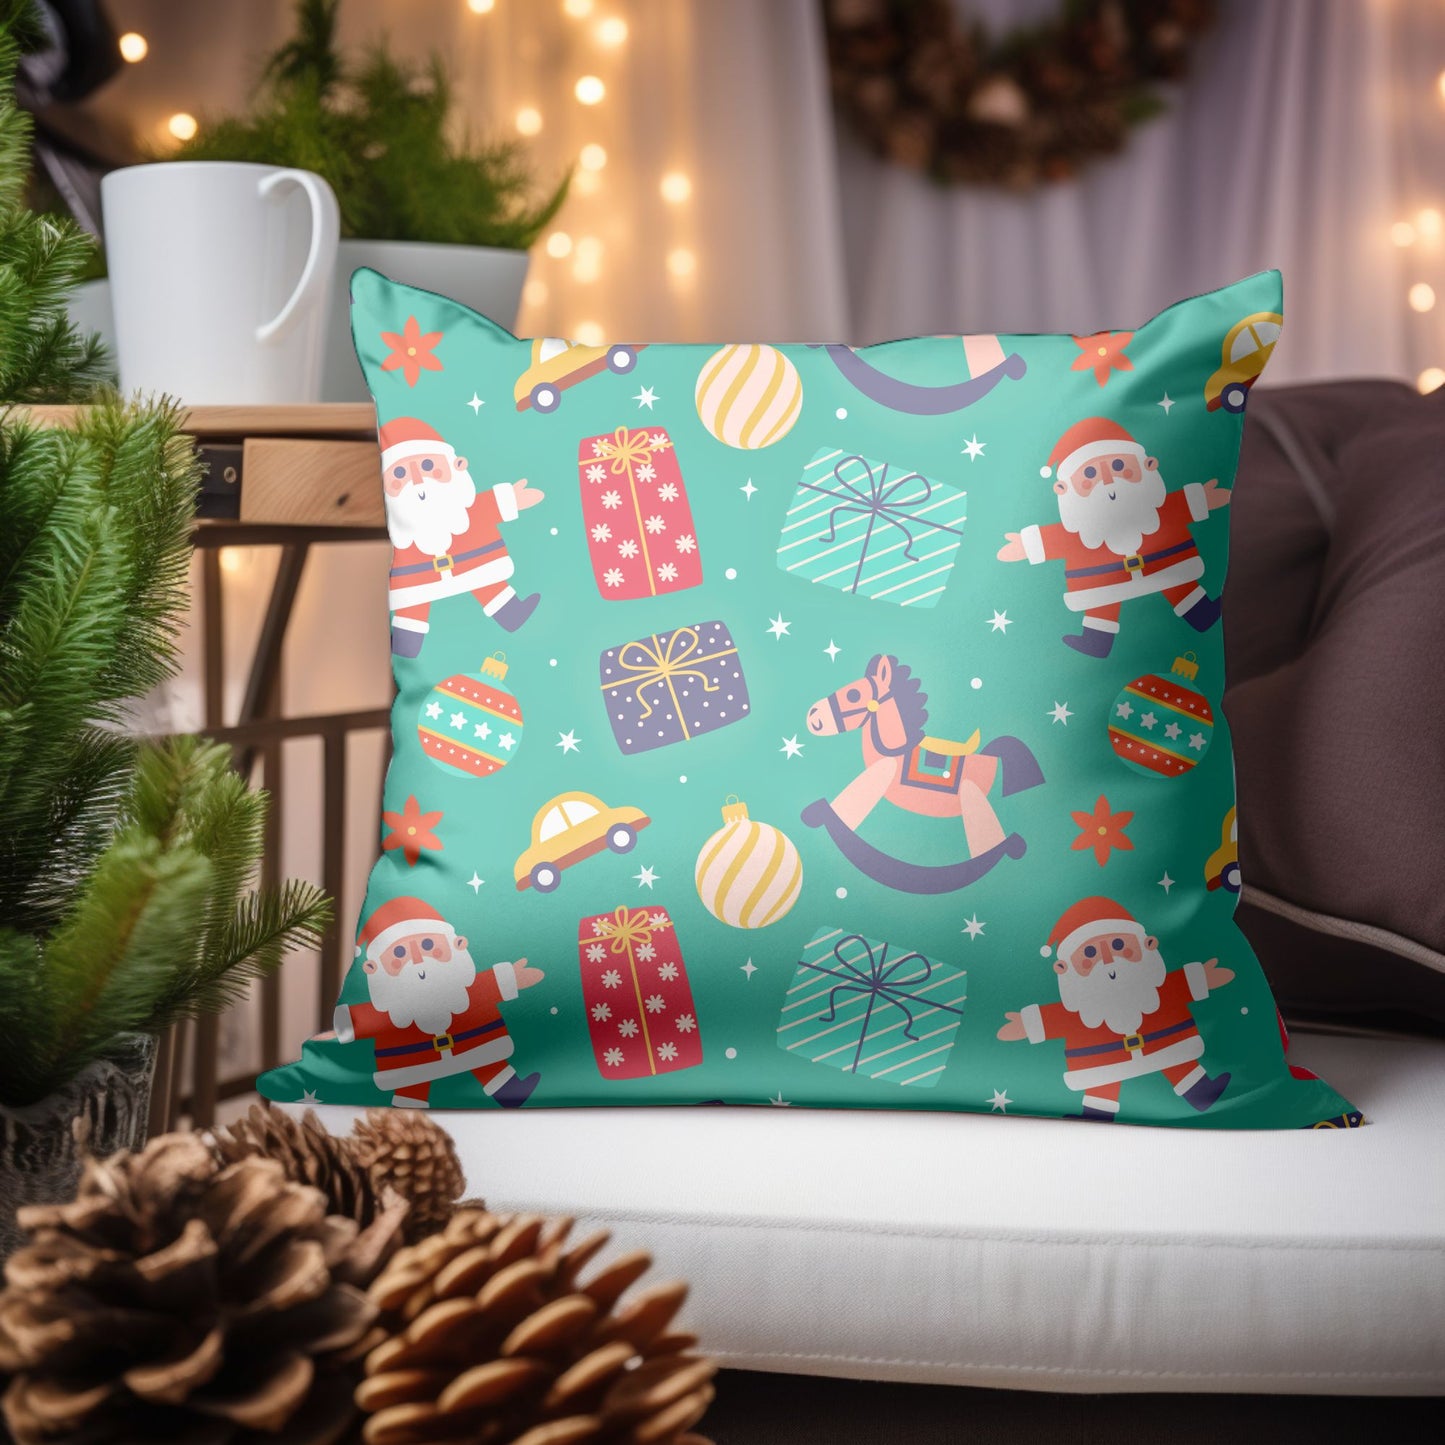 Holiday-Themed Pillow with Child-Friendly Christmas Design